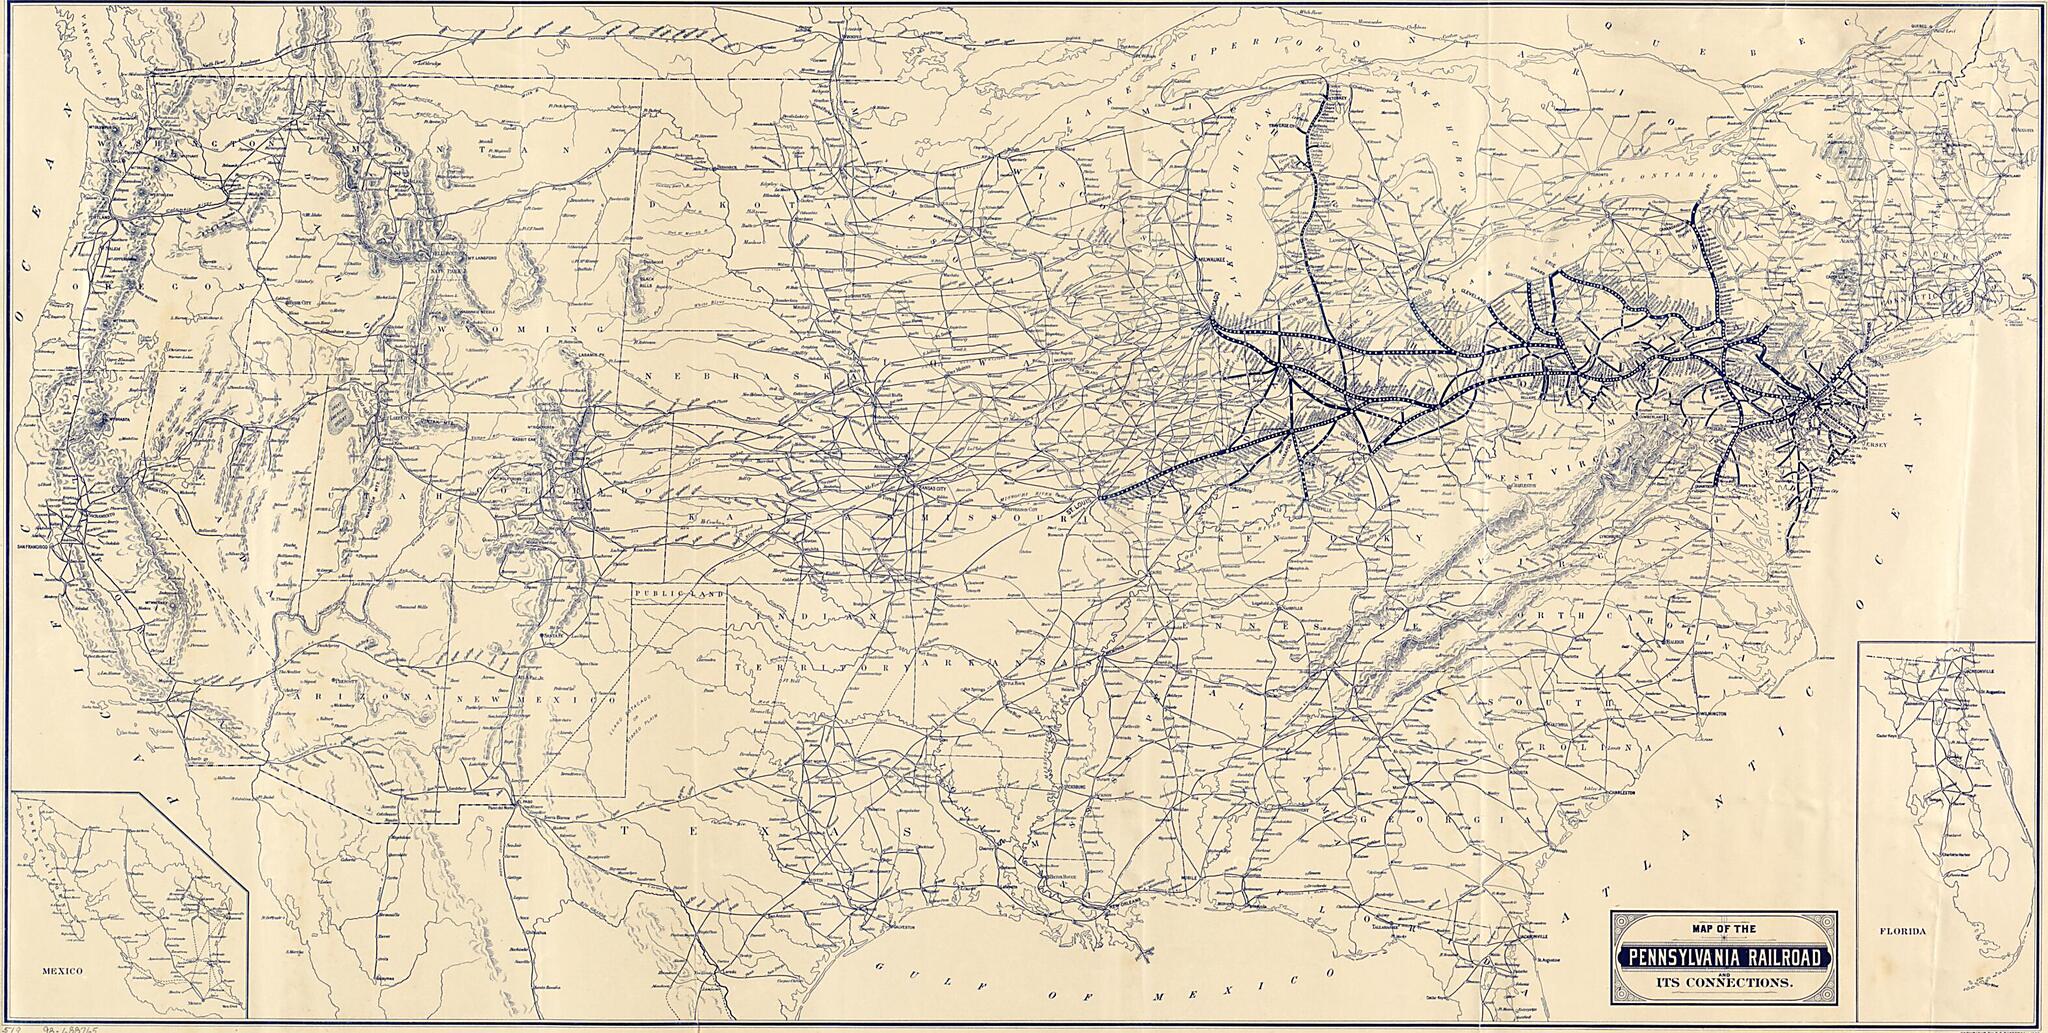 This old map of Map of the Pennsylvania Railroad and Its Connections from 1889 was created by S. C. Patterson,  Pennsylvania Railroad in 1889